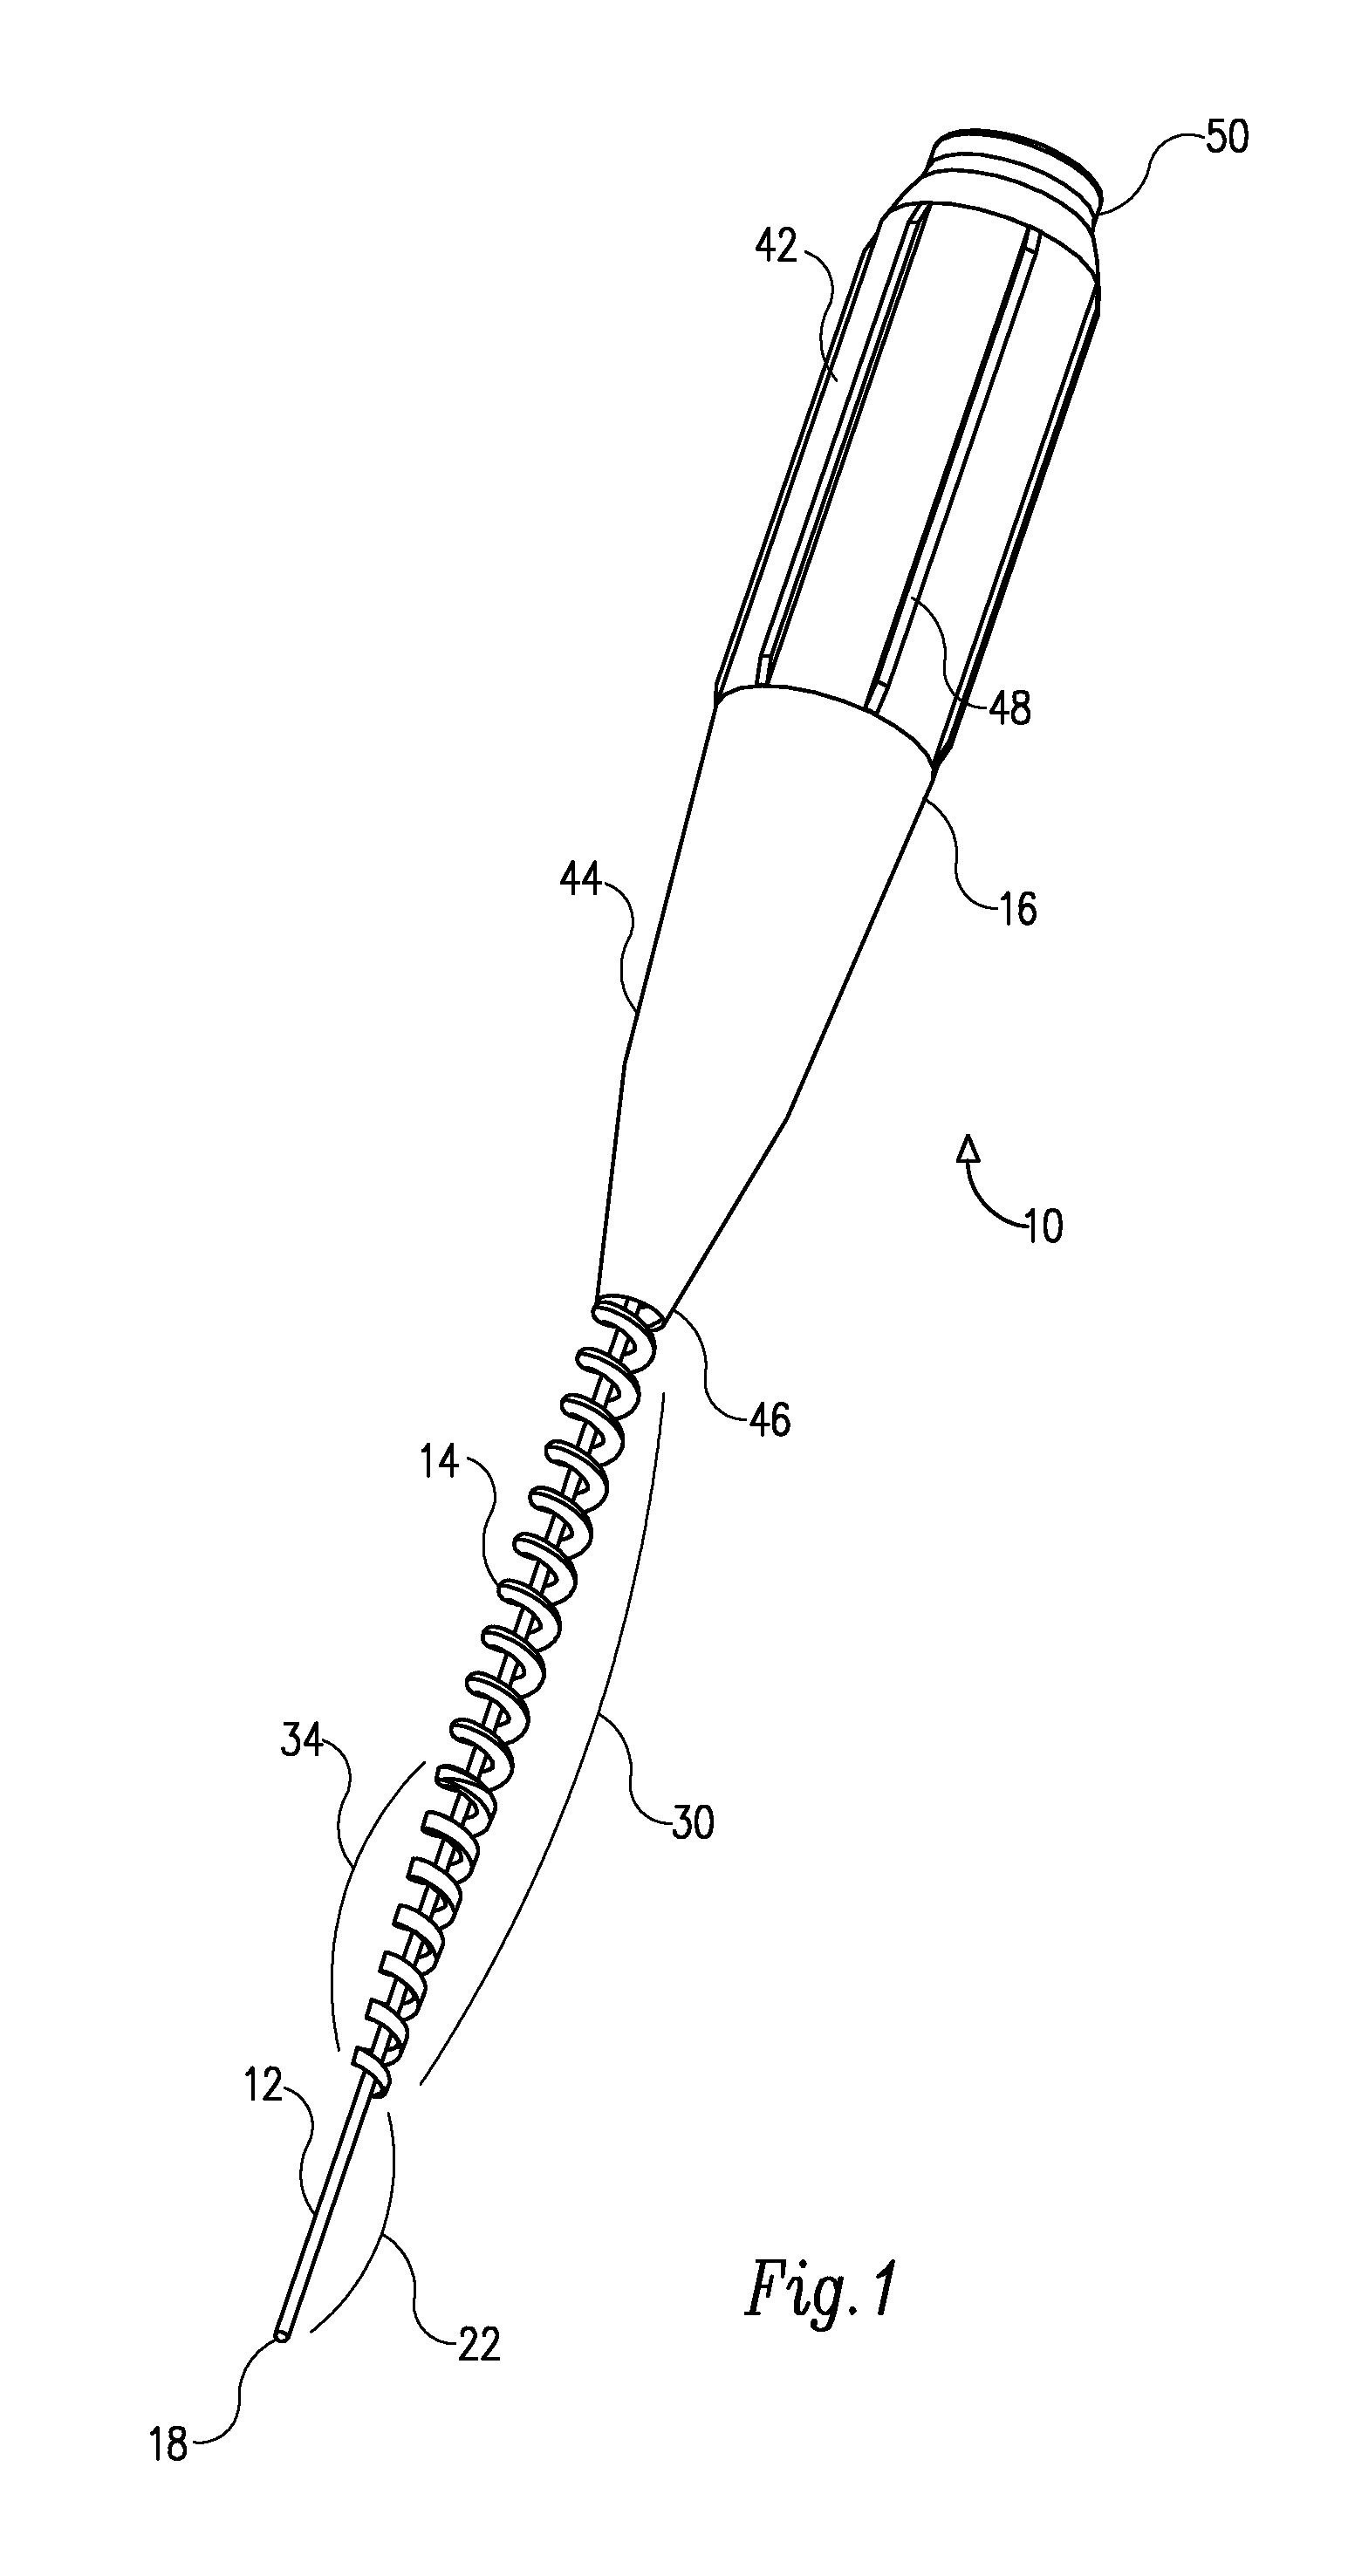 Rotary endodontic file with frictional grip